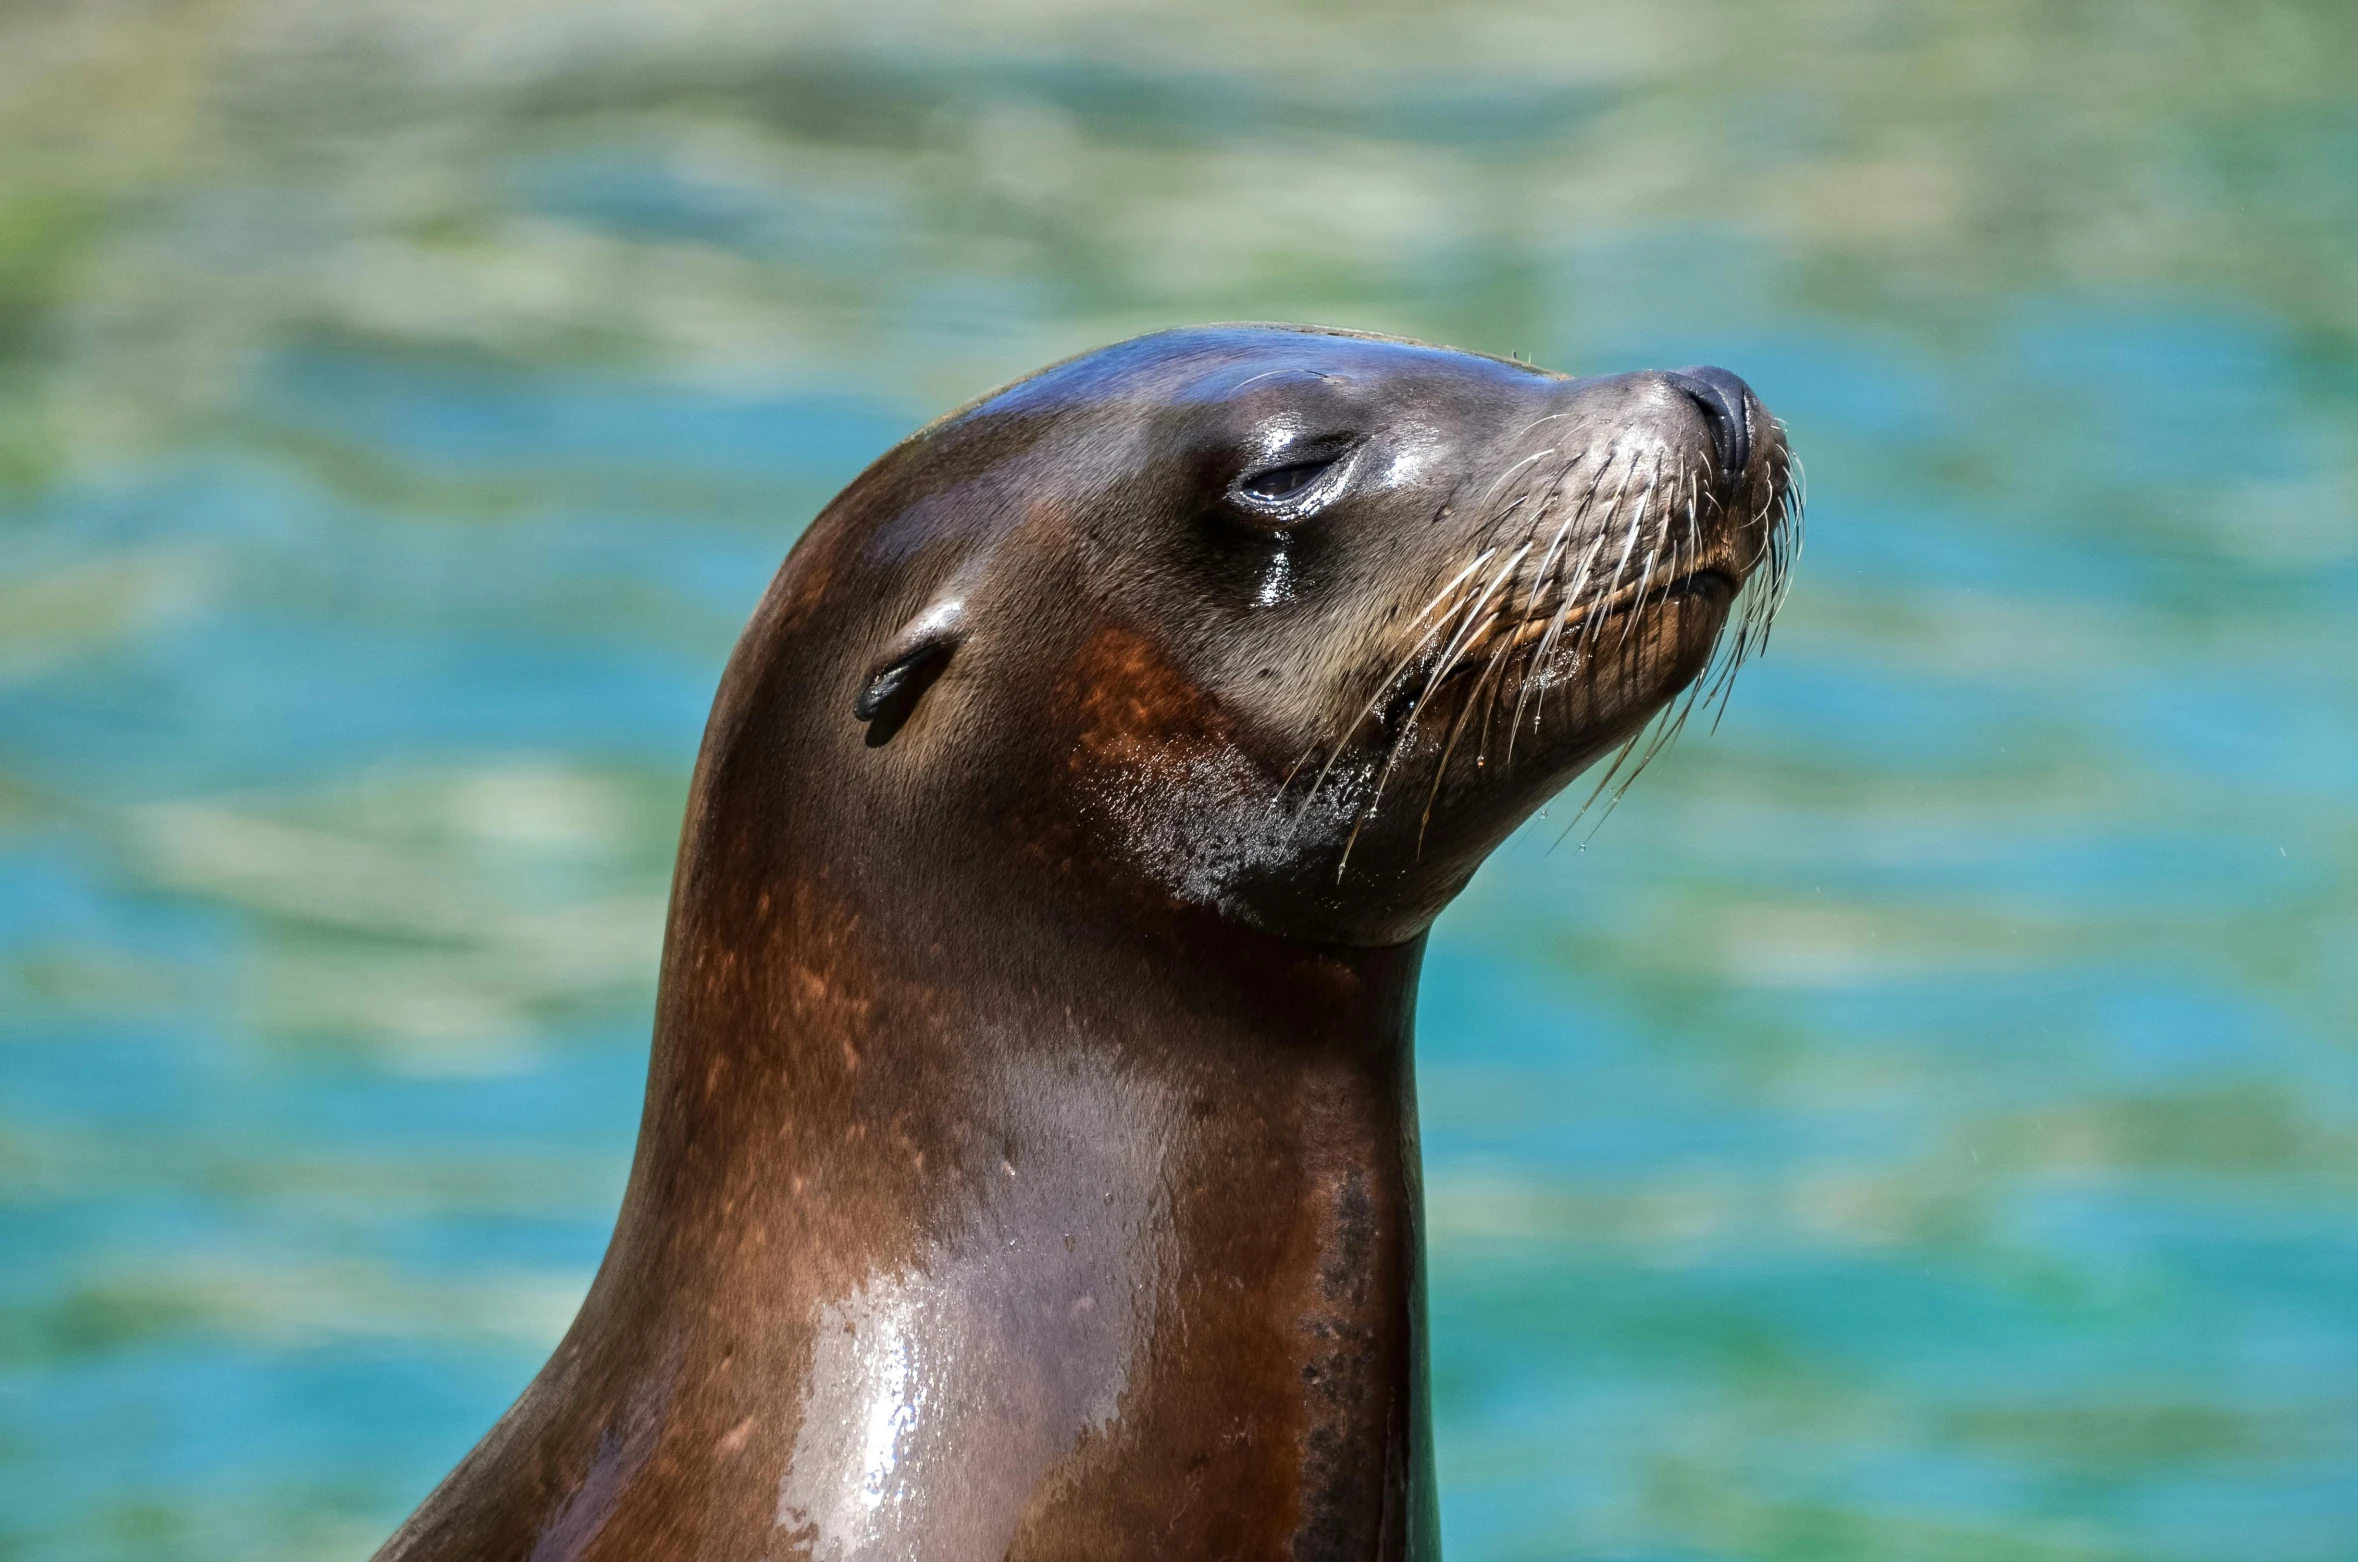 a close up of a sea lion near a body of water, standing next to water